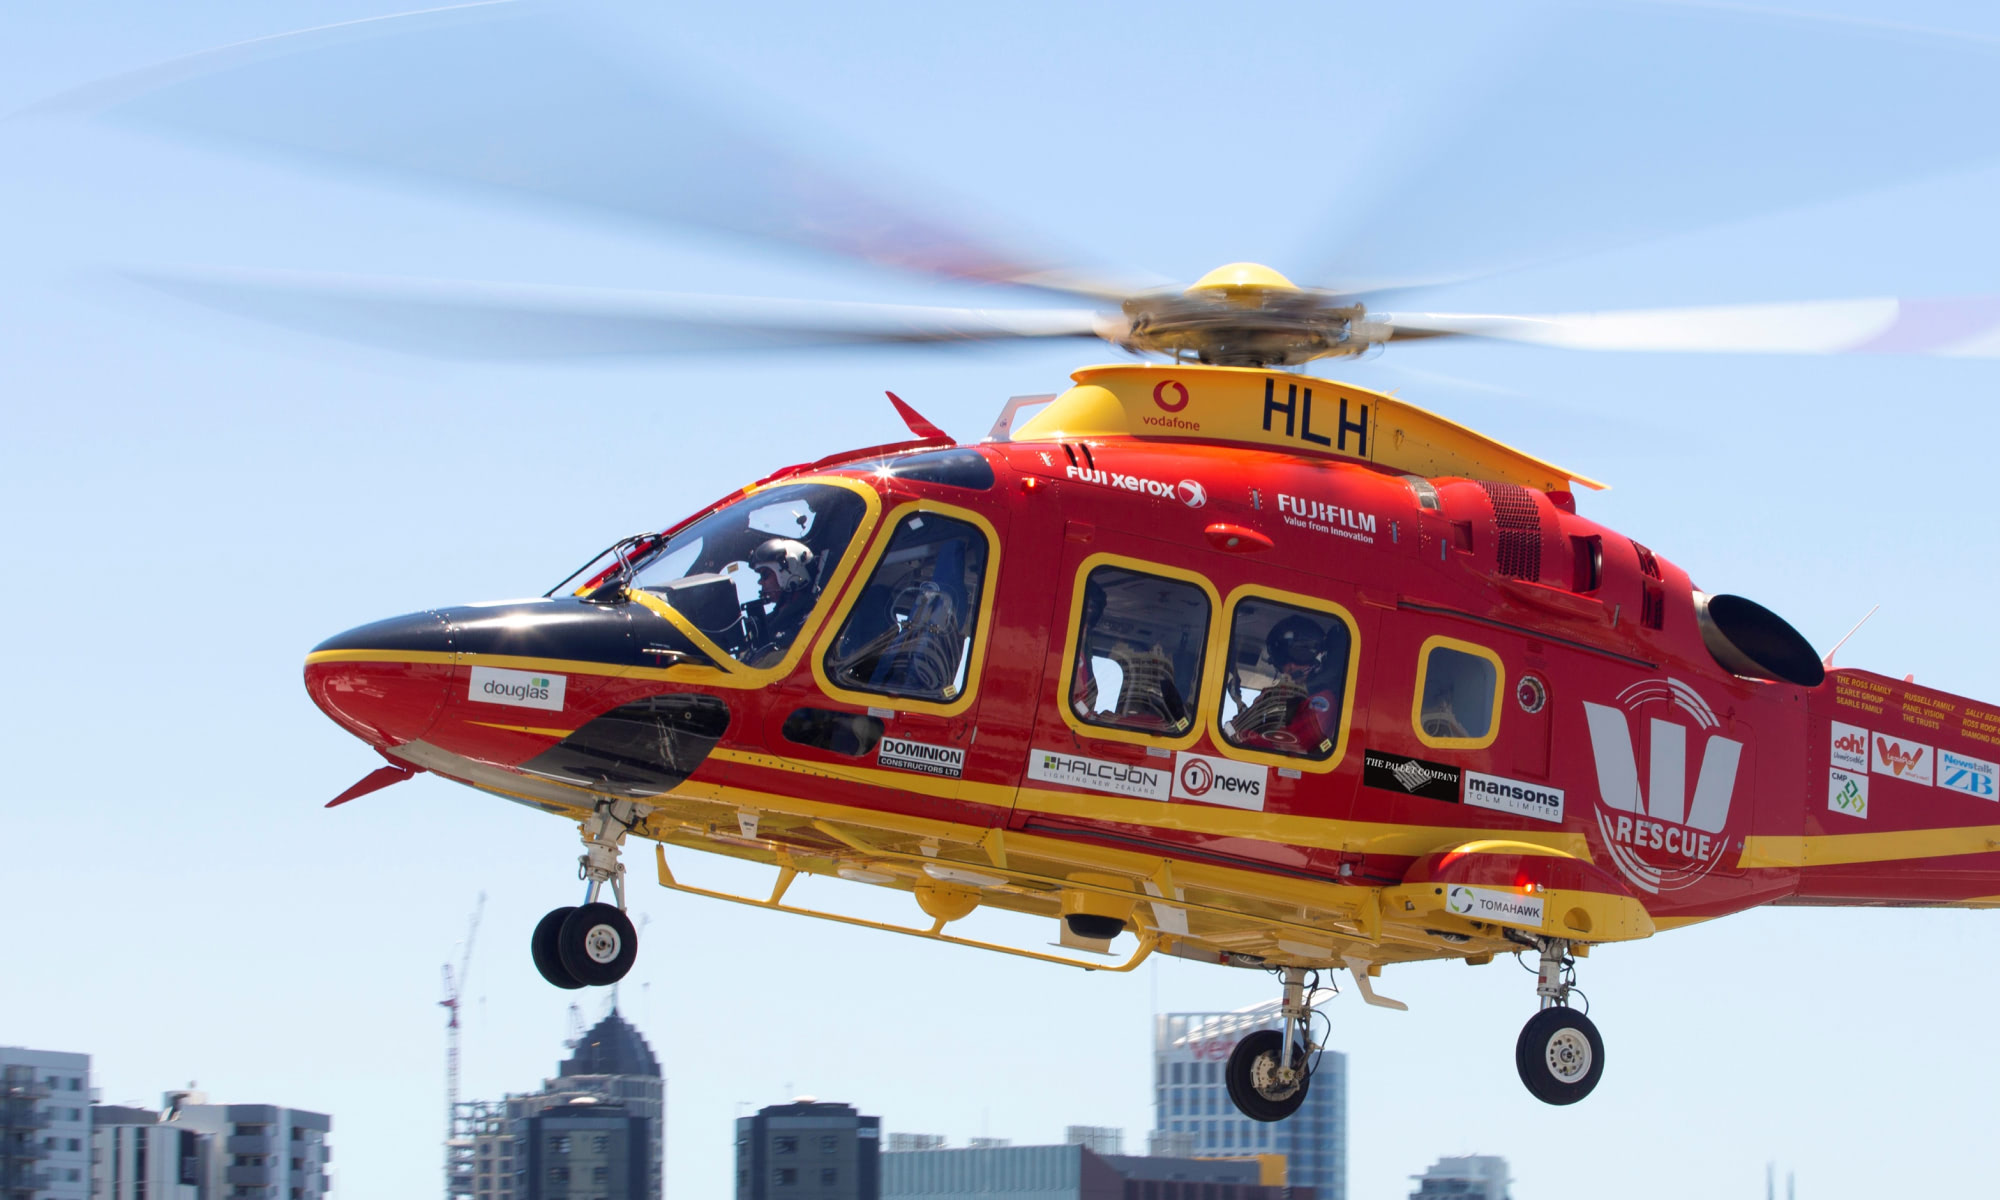 Westpac rescue helicopter flying with city background